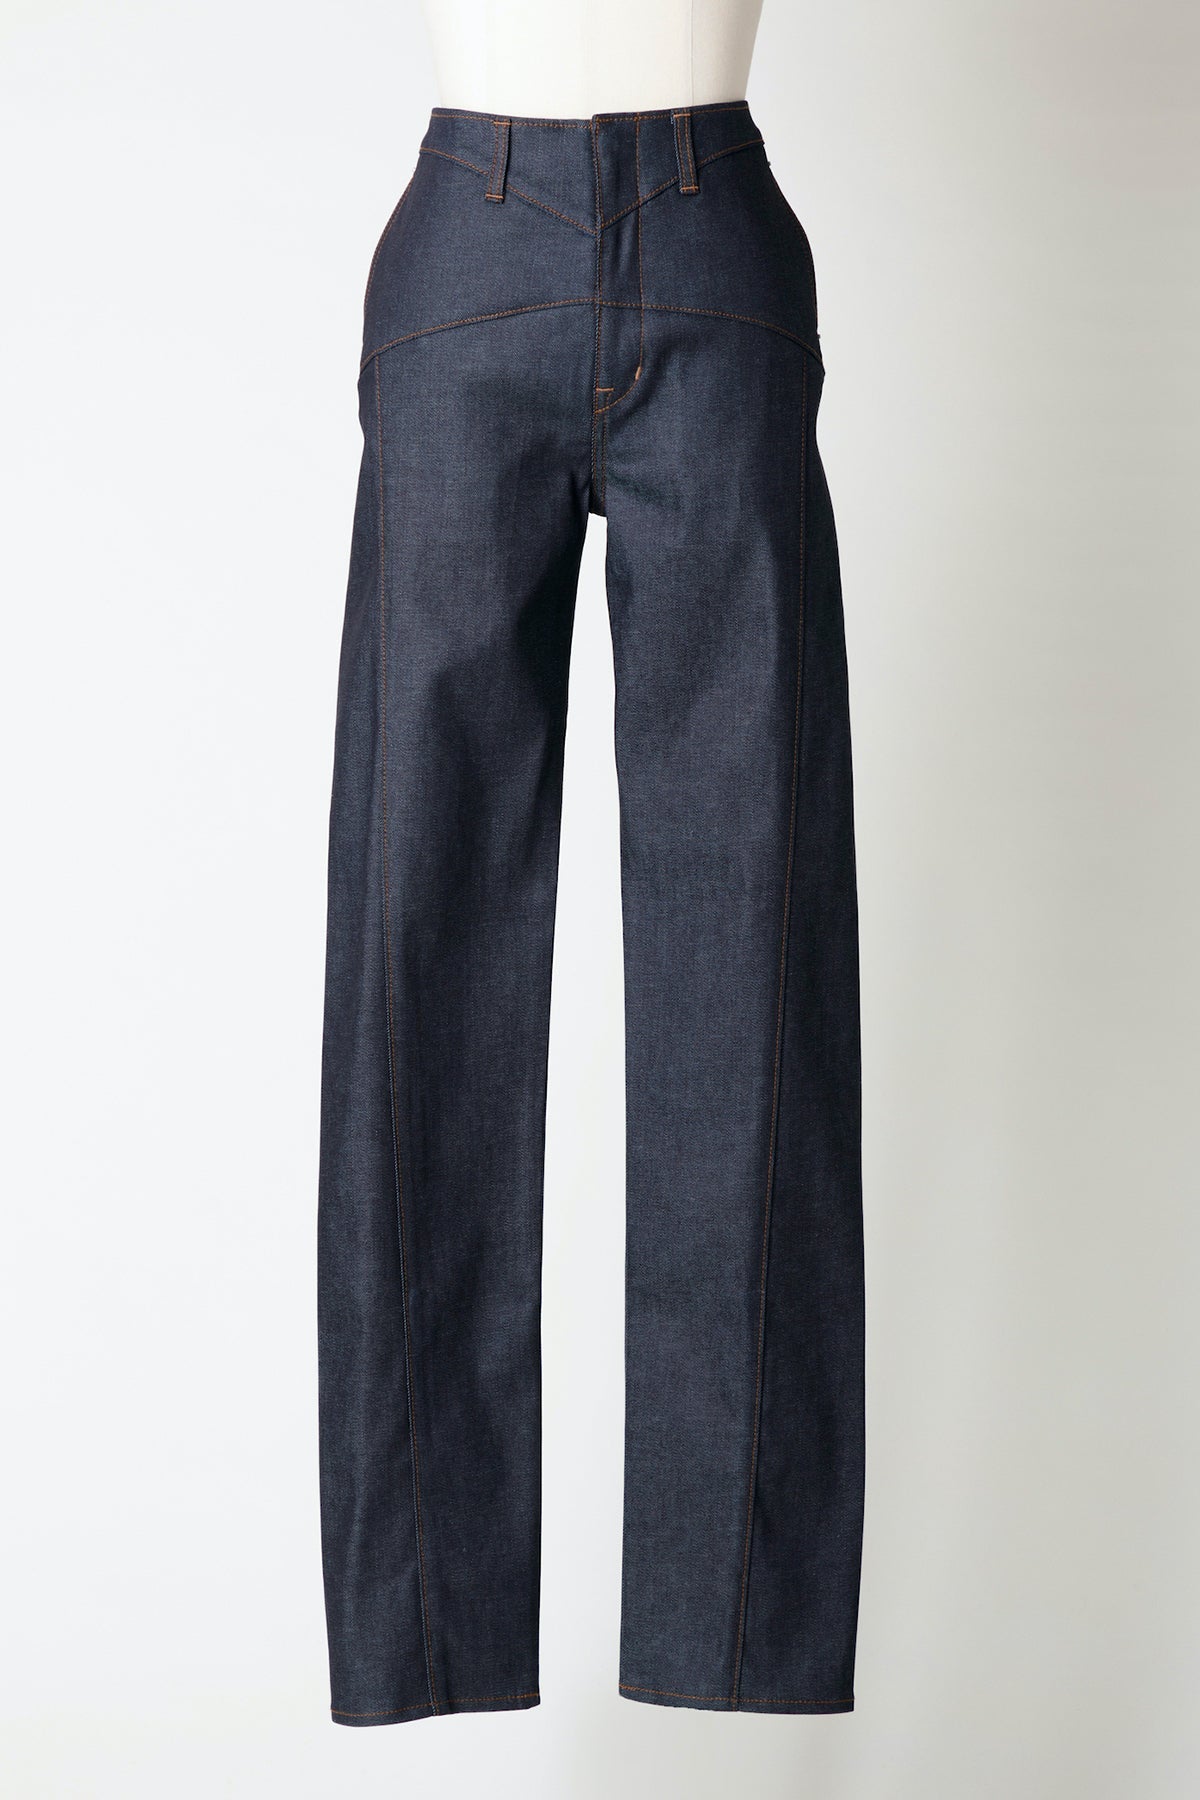 12oz HIGH-RISE COATED JEANS